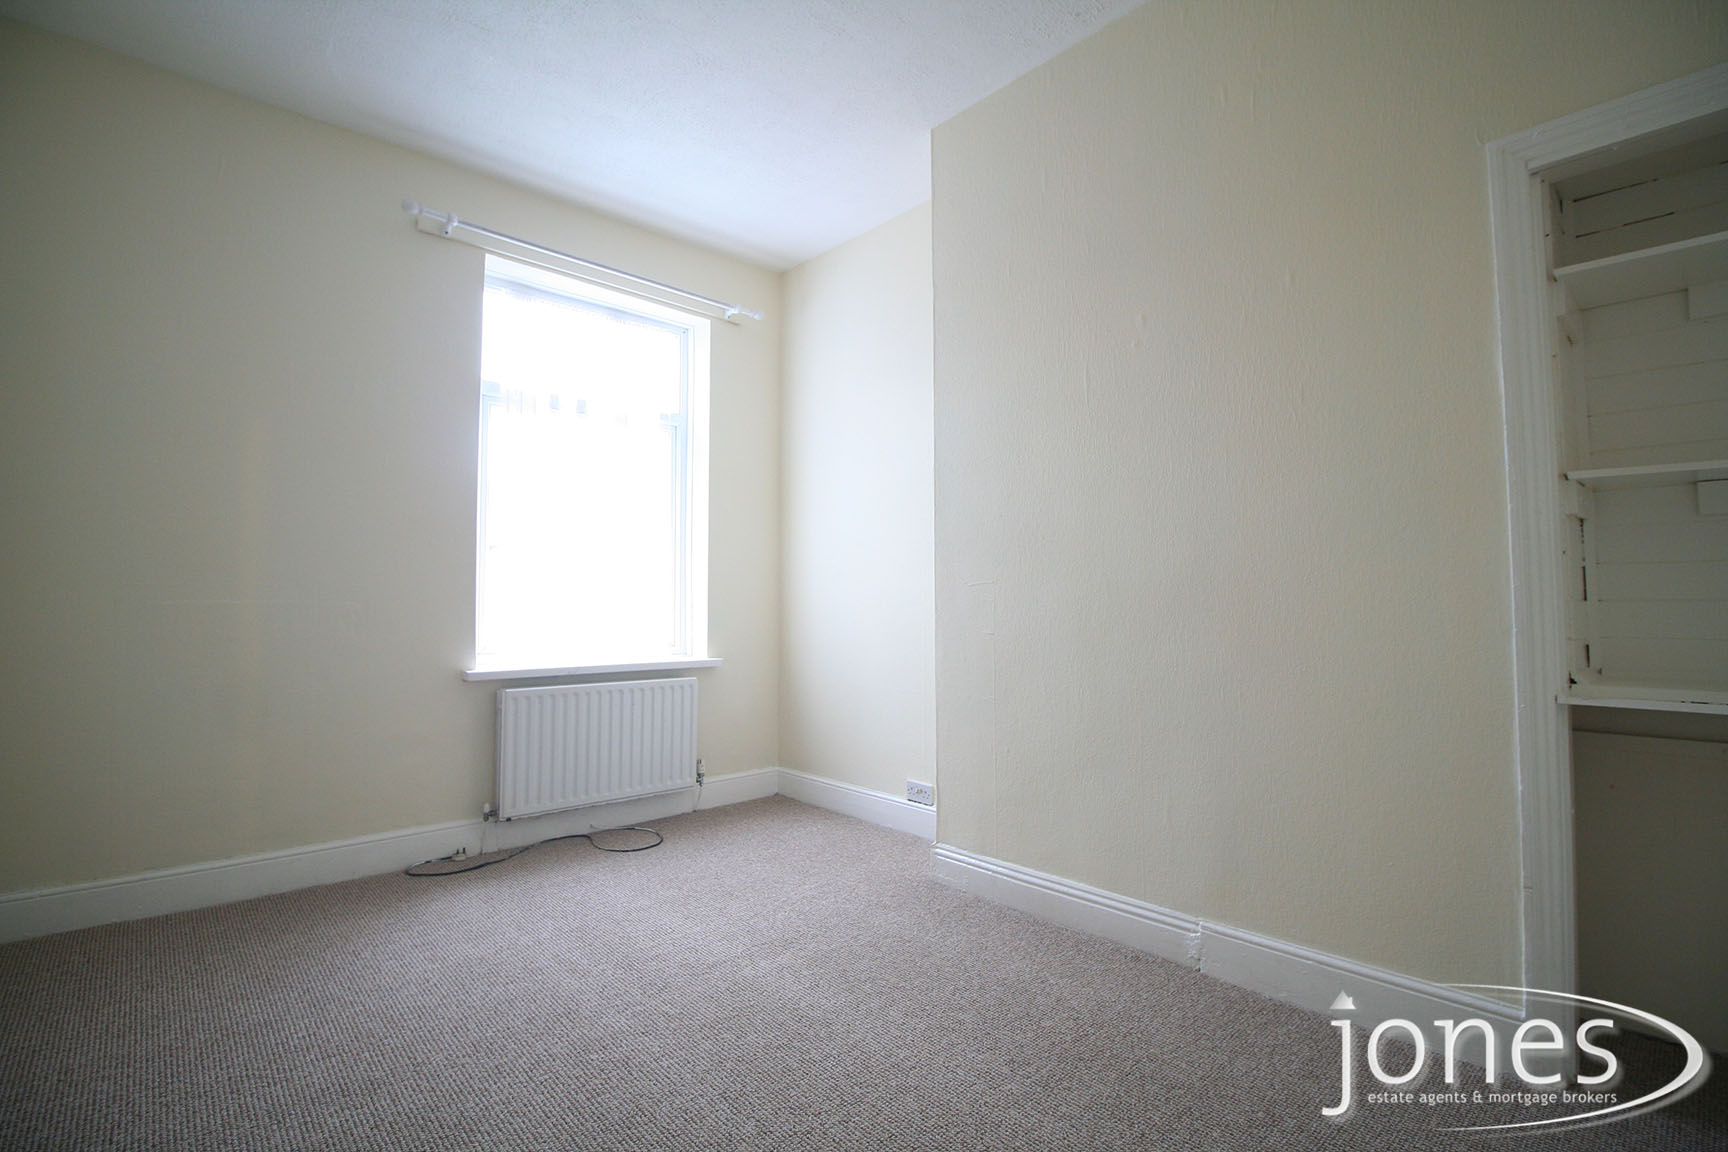 Home for Sale Let - Photo 06 Victoria Road, Thornaby, TS17 6HH